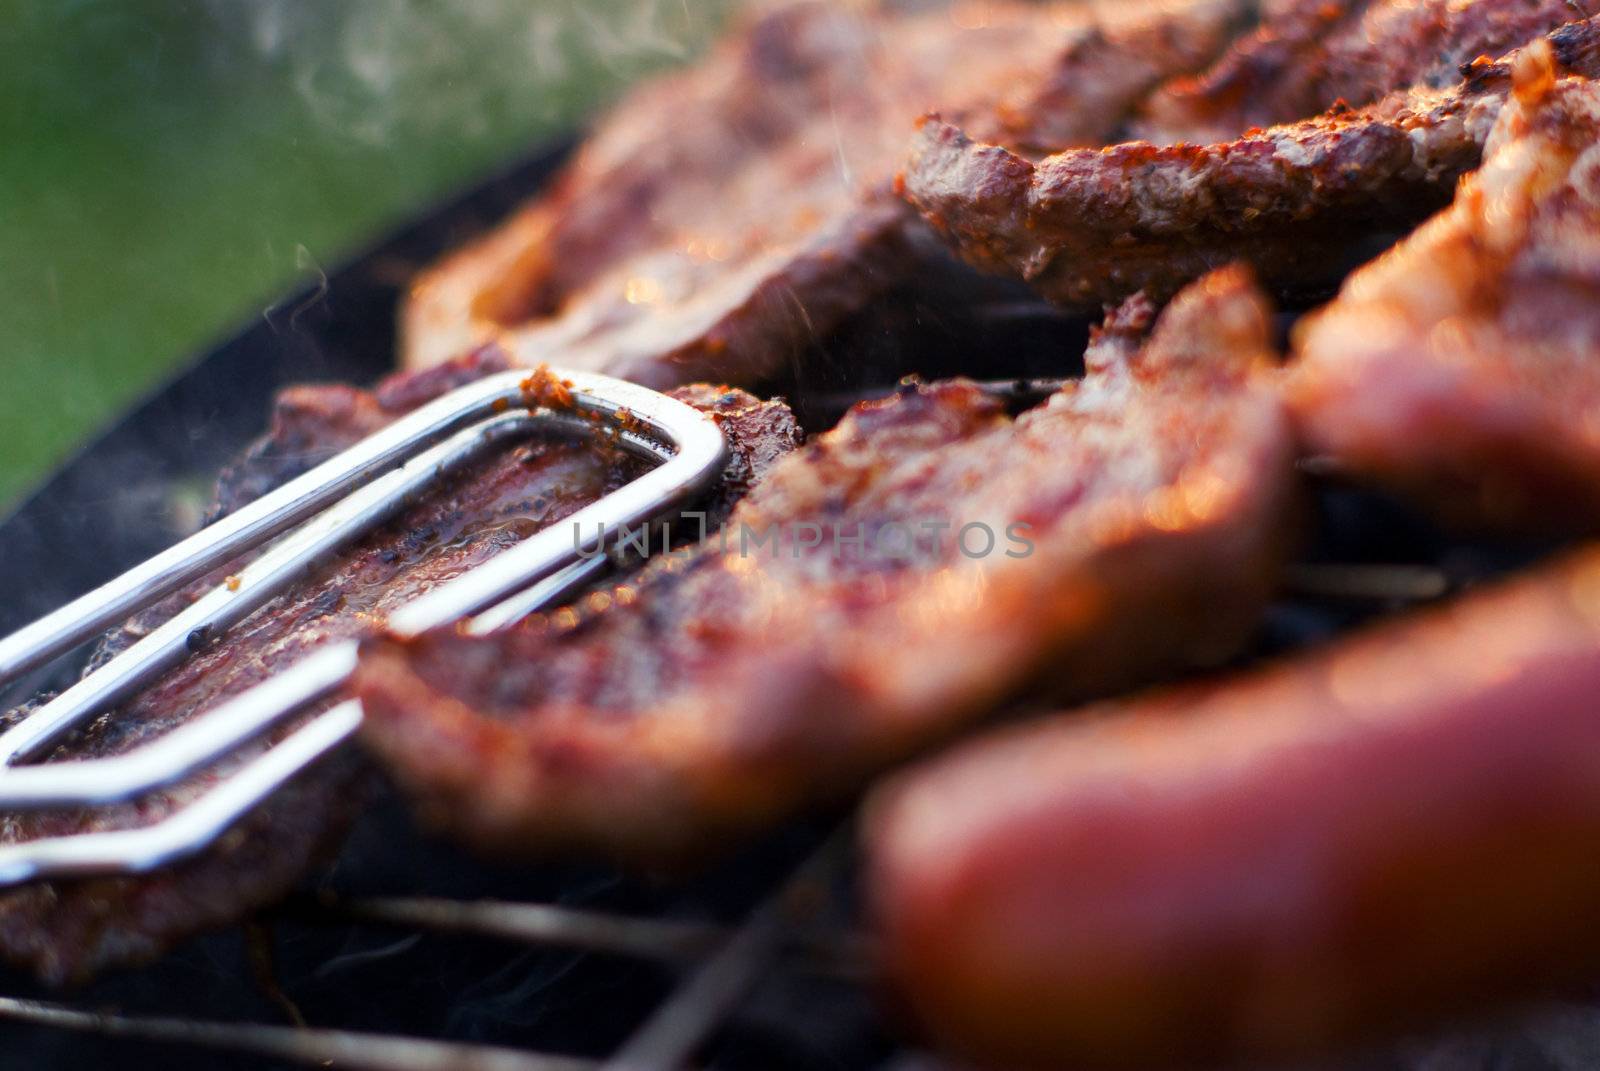 Delicious chuck steaks on the grill - detail with metal tongs. Shallow depth of field.